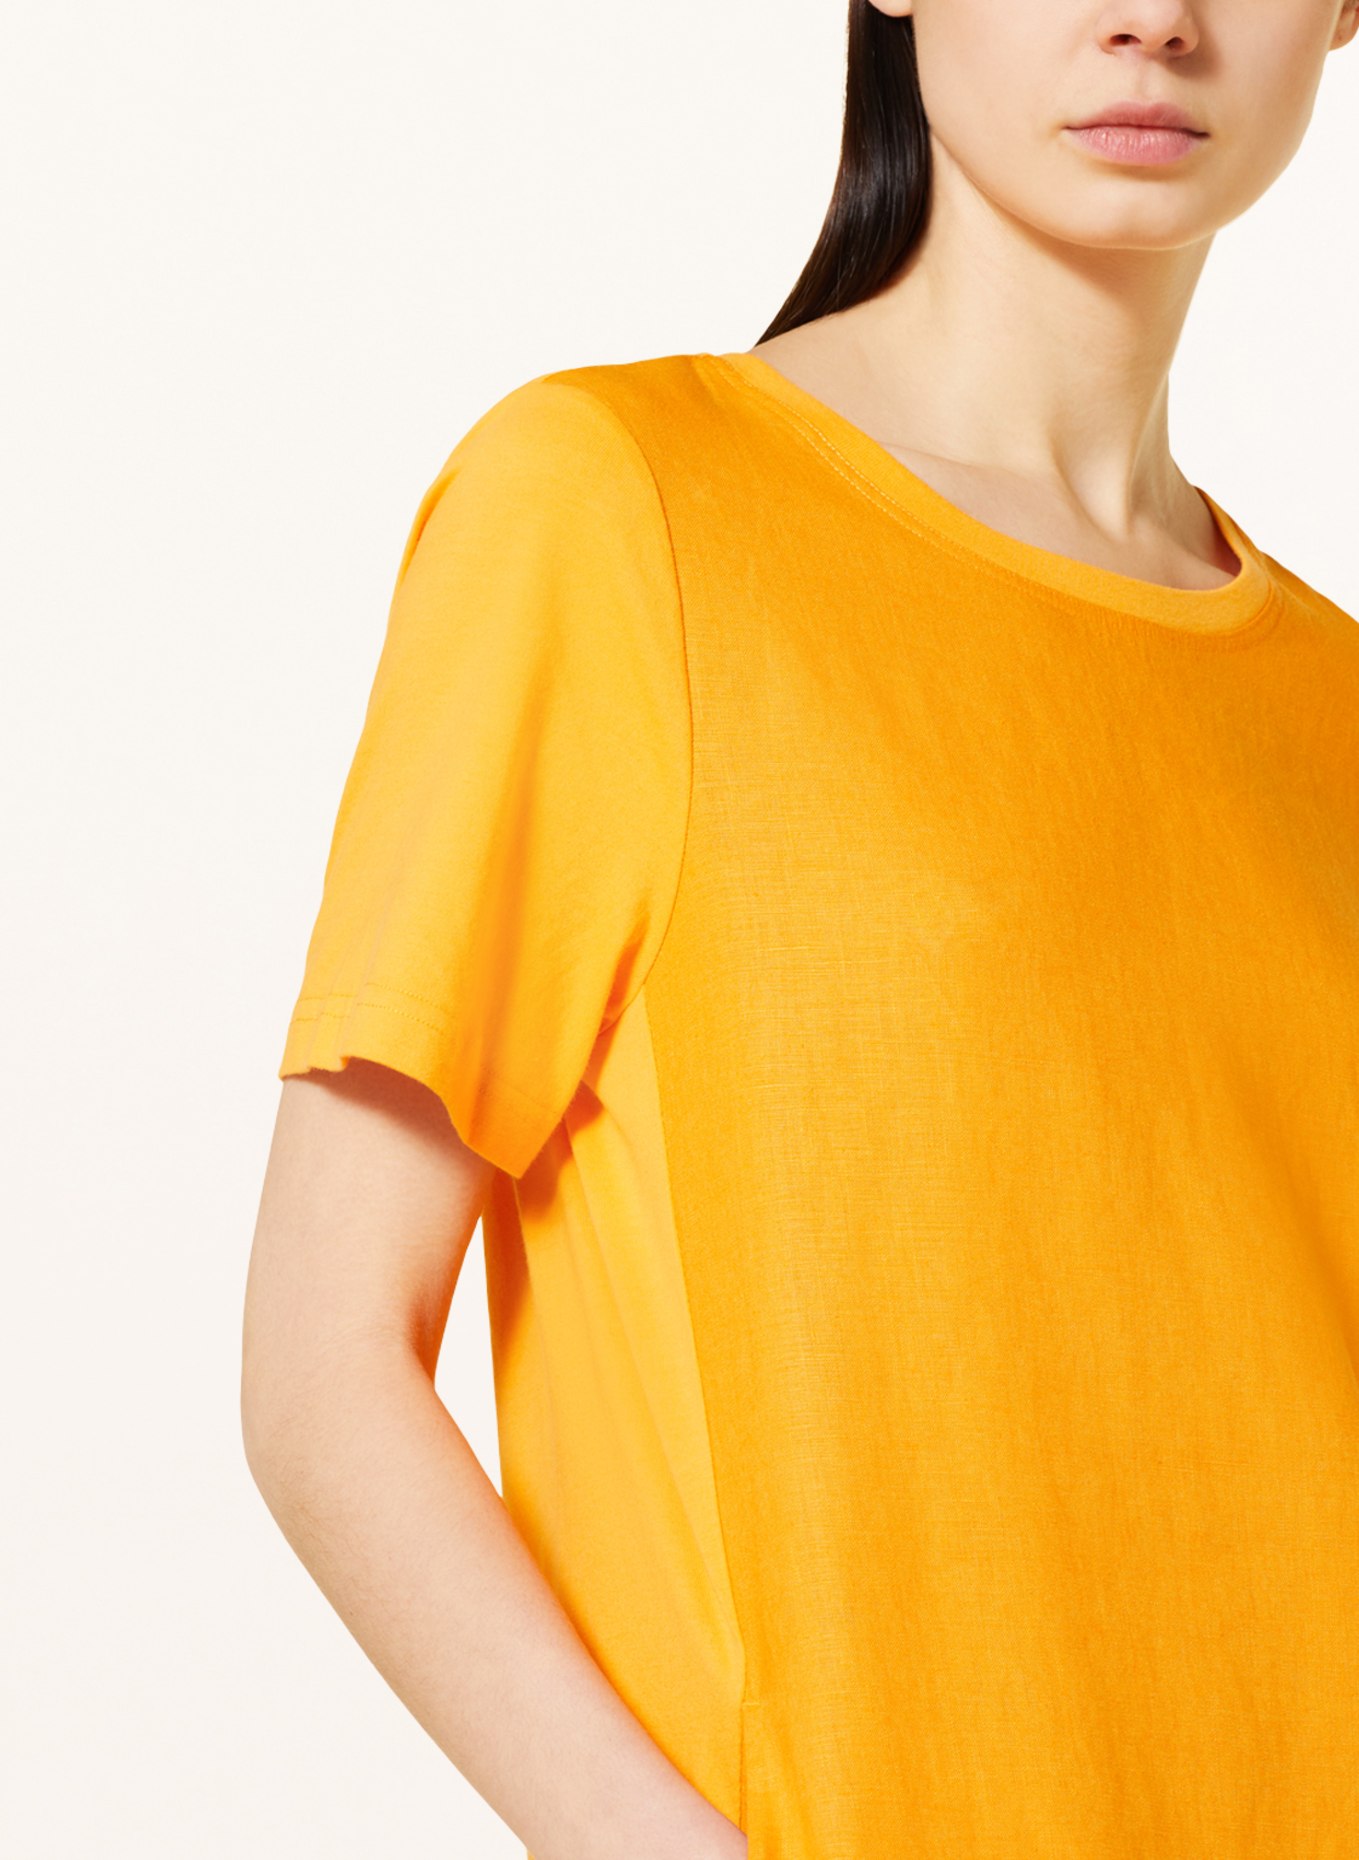 oui Linen dress in mixed materials, Color: ORANGE (Image 4)